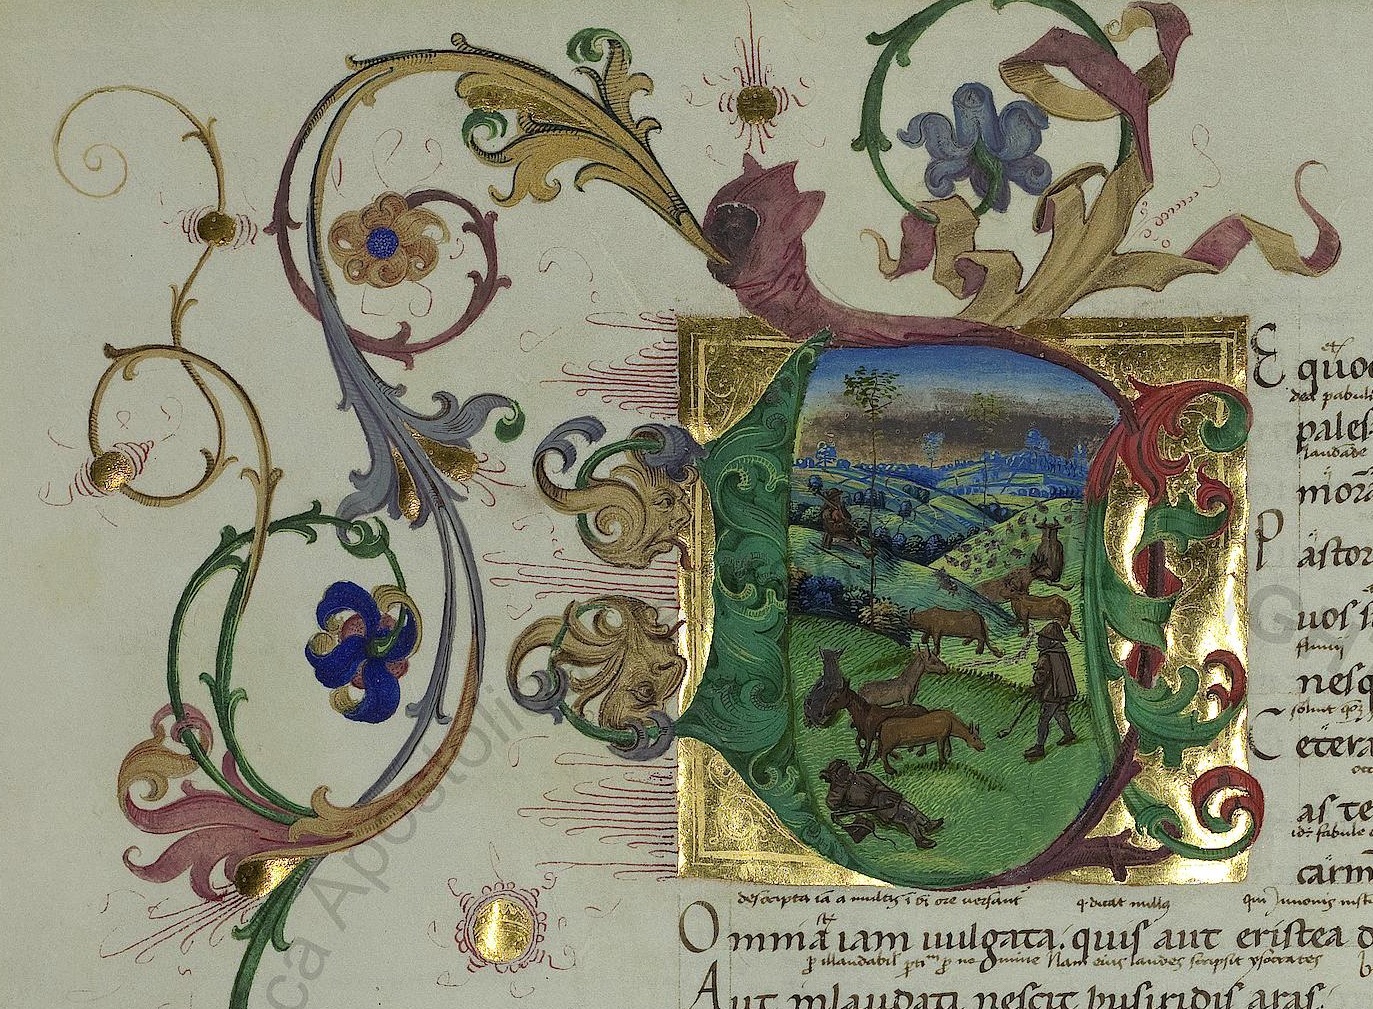 An early instance of the use of gold leaf on paper